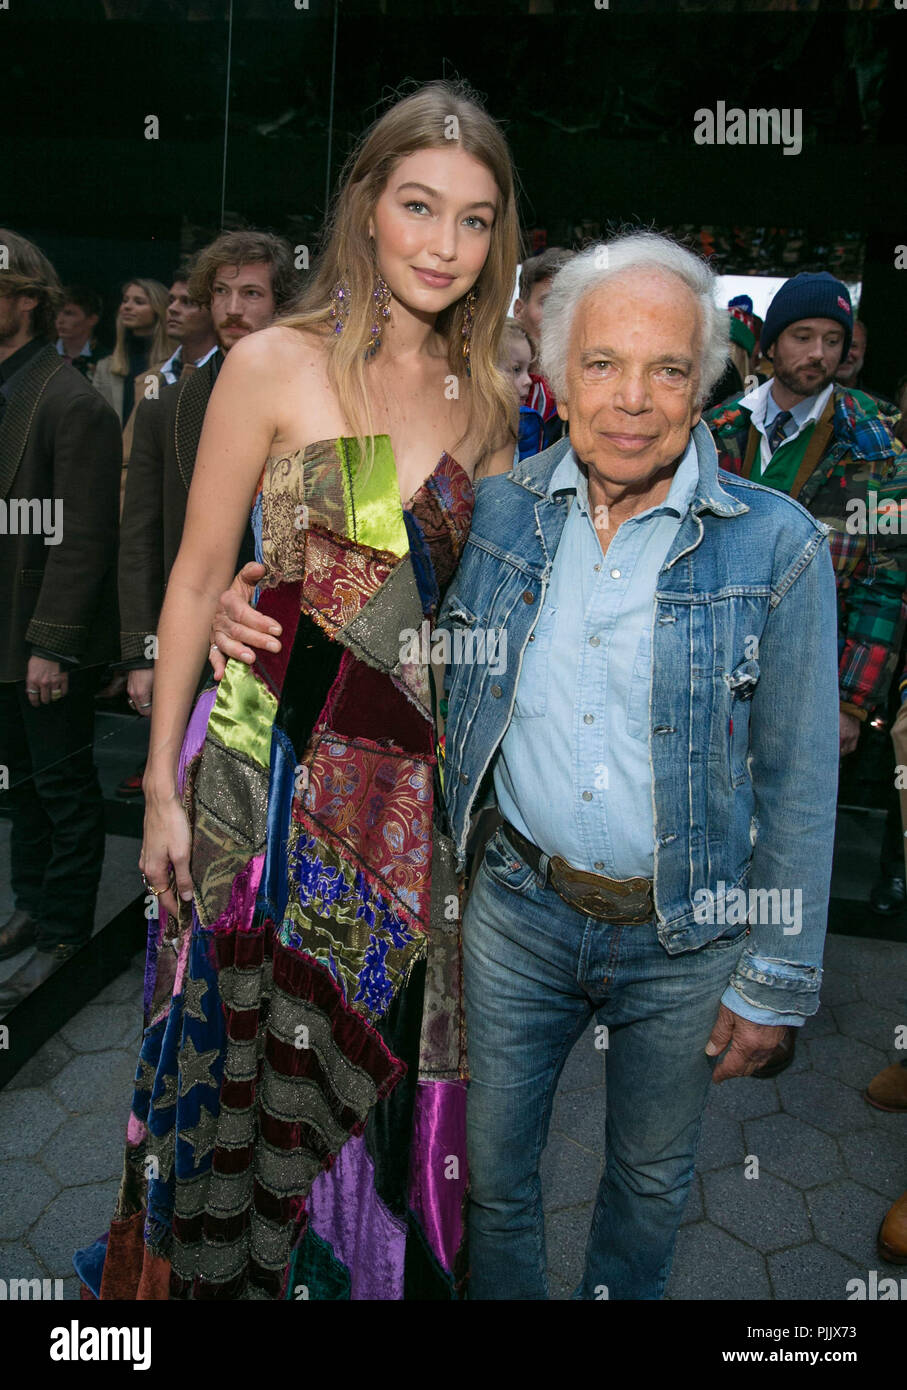 Ralph Lauren Celebrates his 50th Anniversary with a Fashion Show in Central  Park New York City. Supermodel Gigi Hadid happens to be a special Guest.  Exclusive runway and backstage images are captured